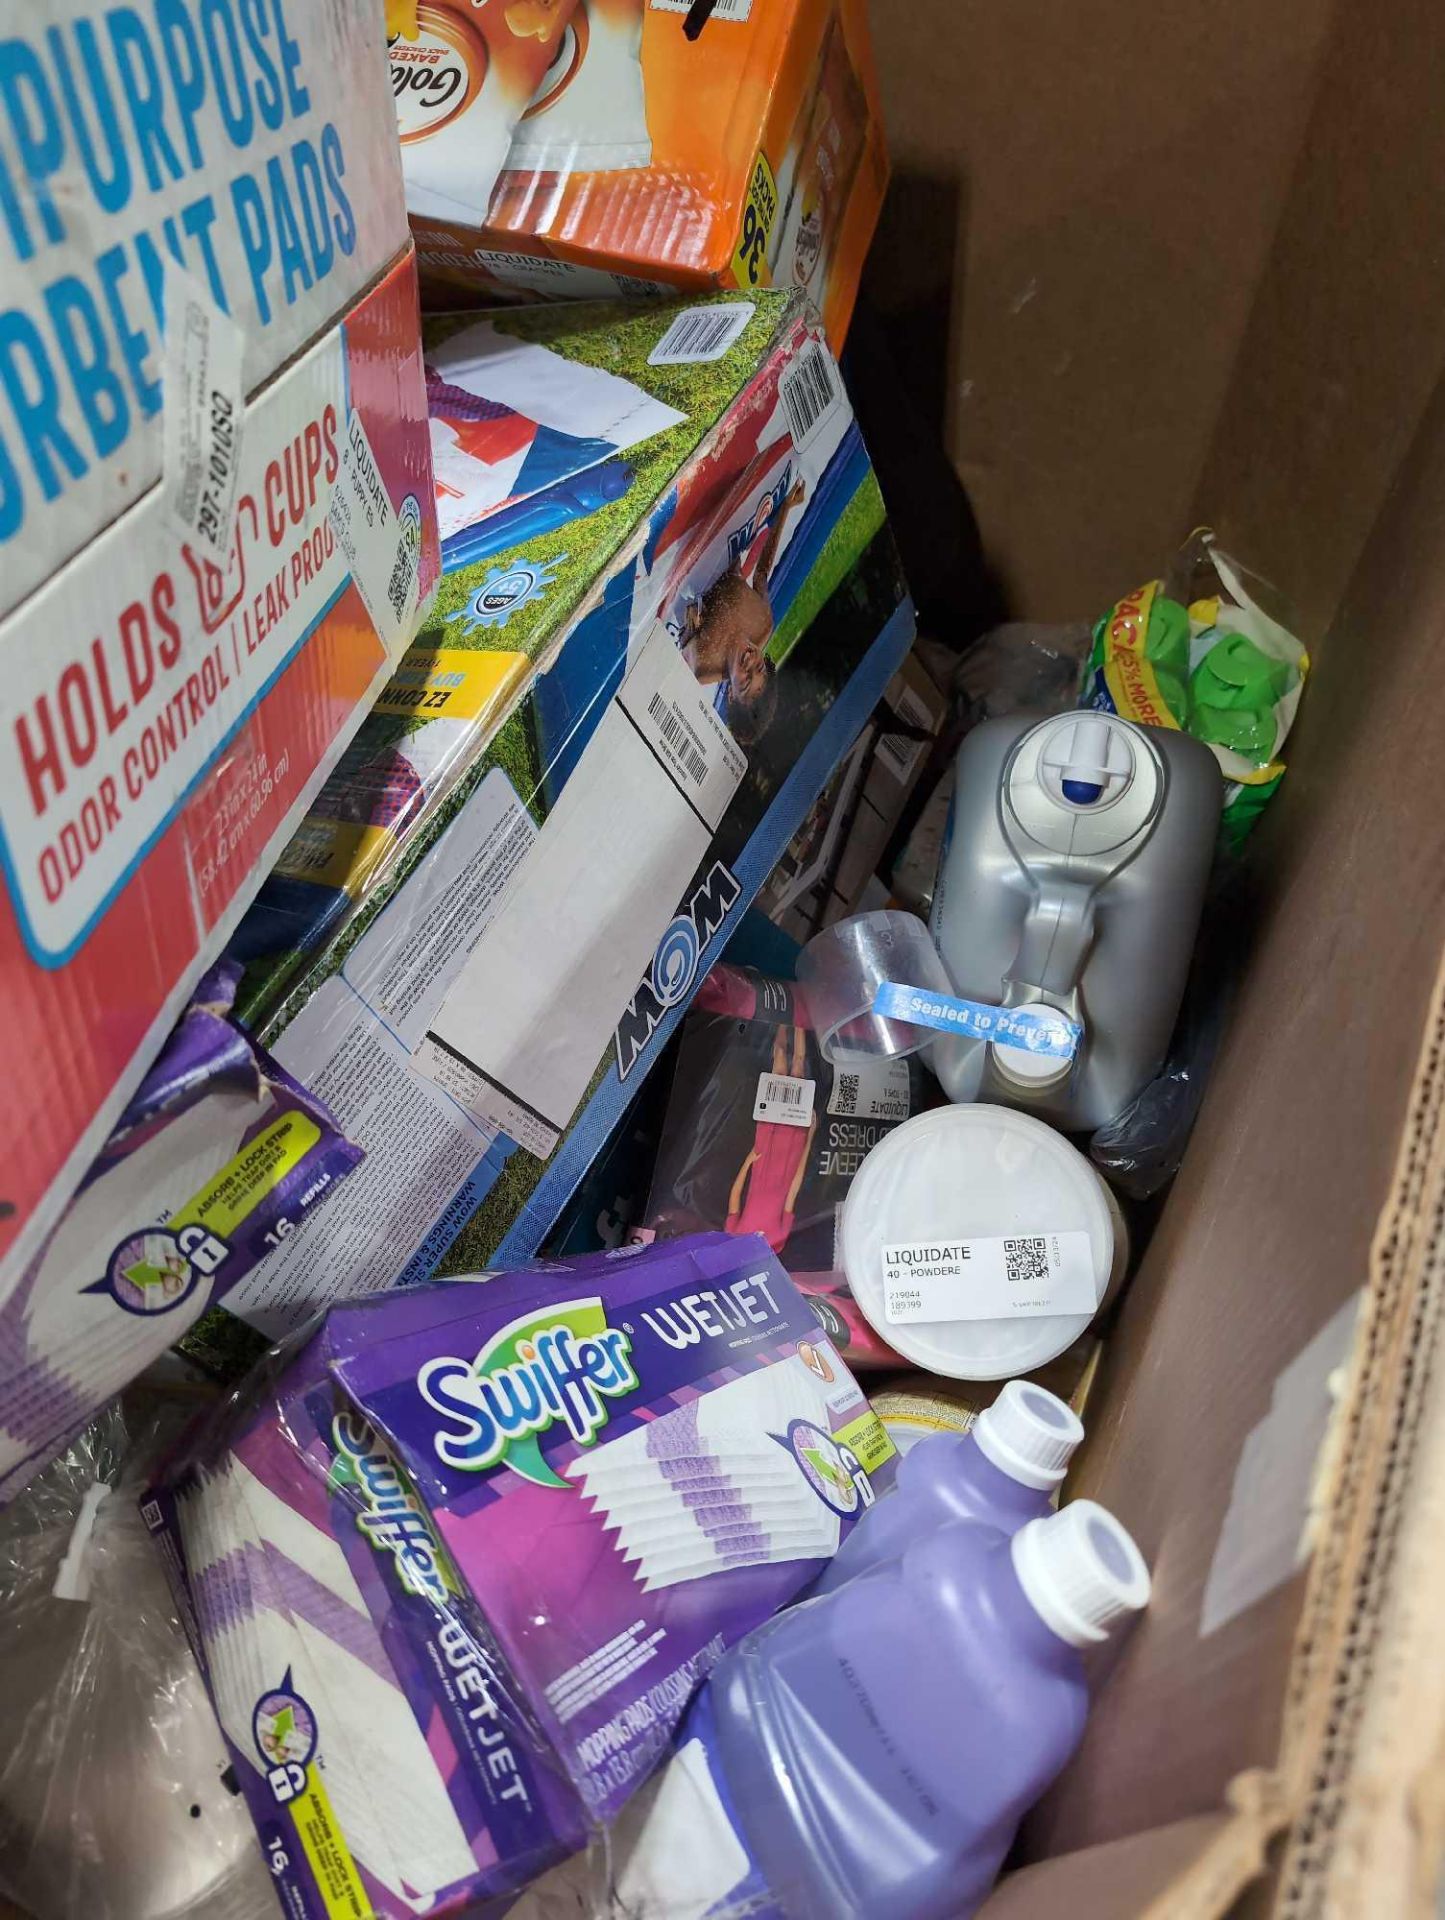 Big box store in a box, pampers, Sheets, Blanket, Intex blow up bed, swiffer wet cloths, gold fish, - Image 9 of 20